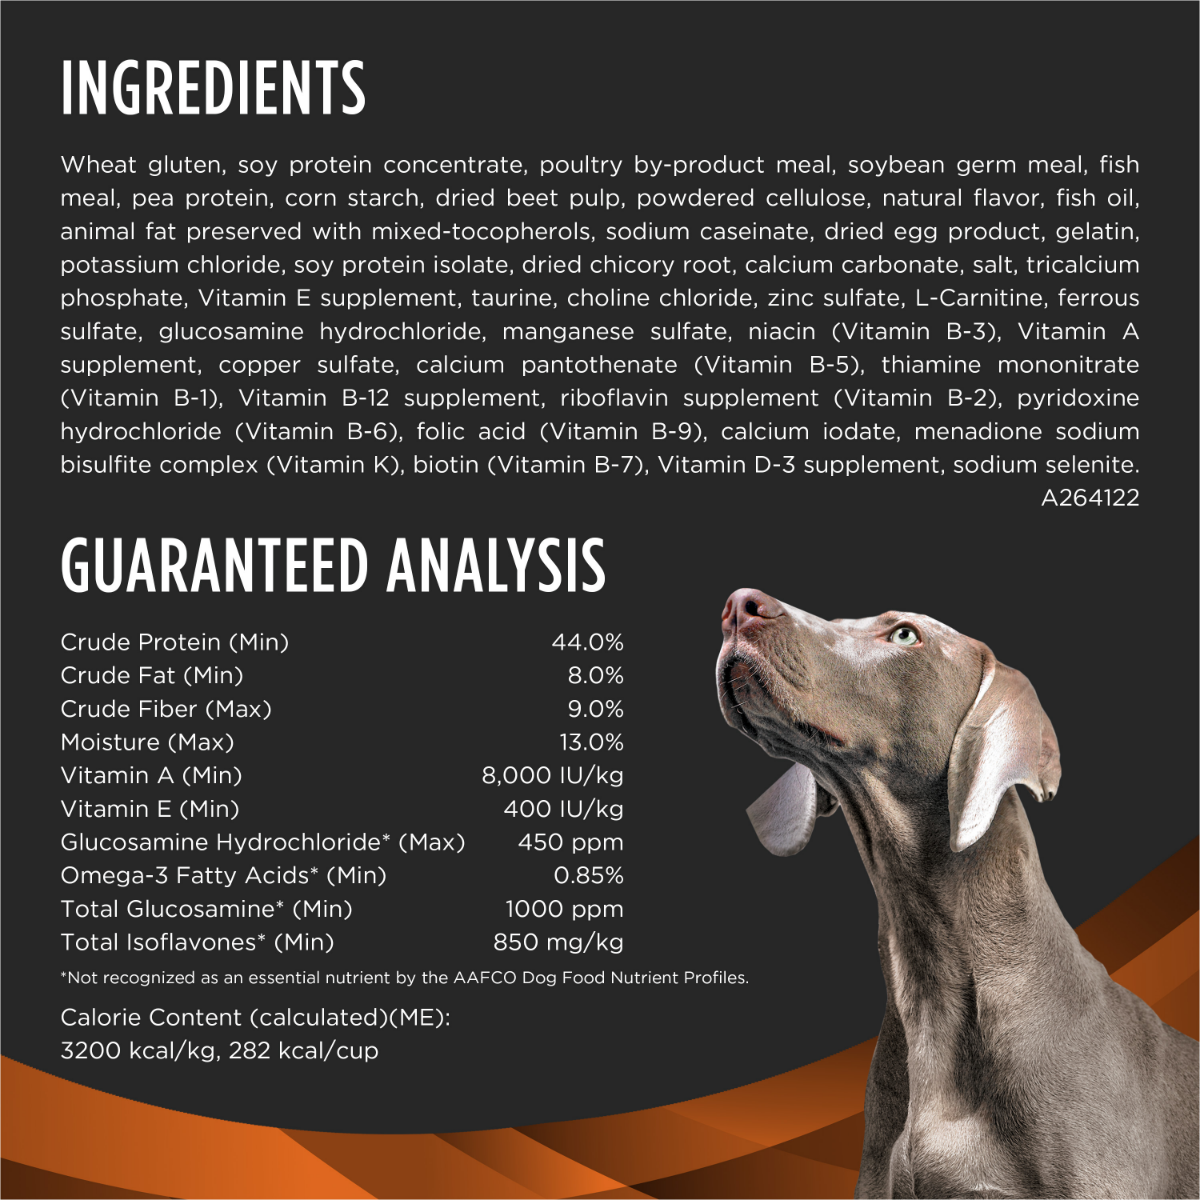 Purina Pro Plan Veterinary Diets - OM Metabolic Response/Joint Mobility